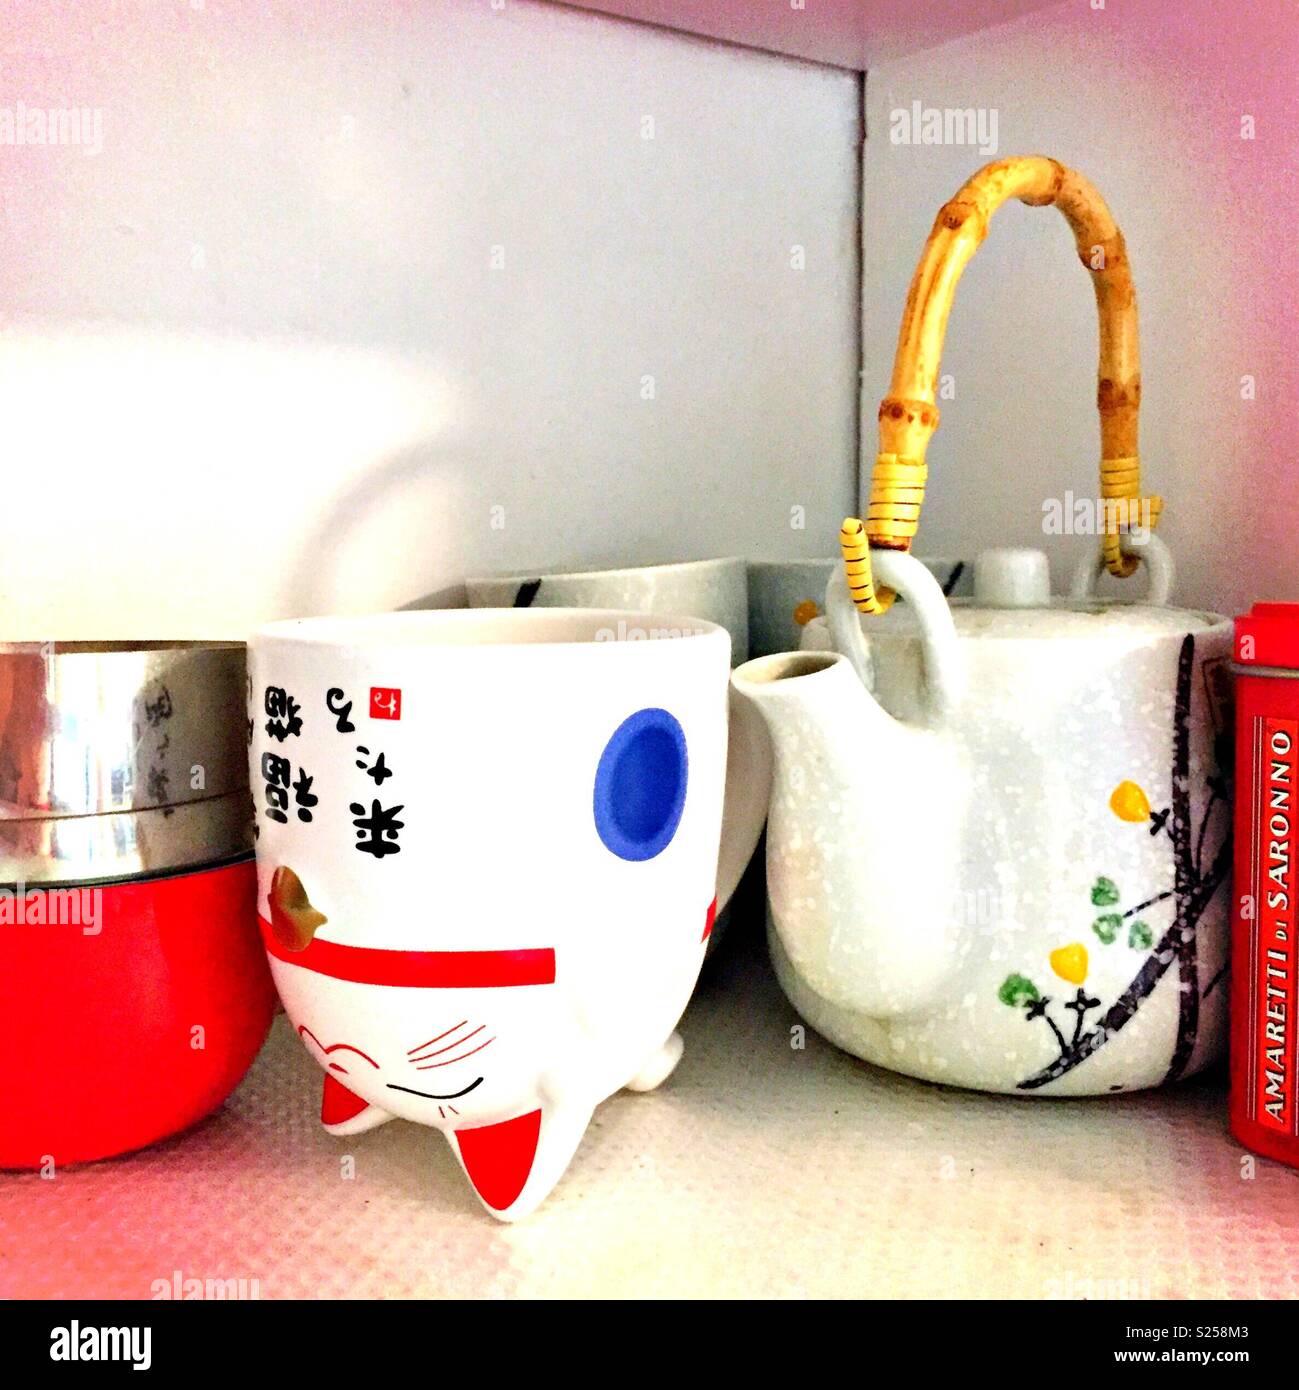 Chinese tea cups and a lucky cat mug. Stock Photo